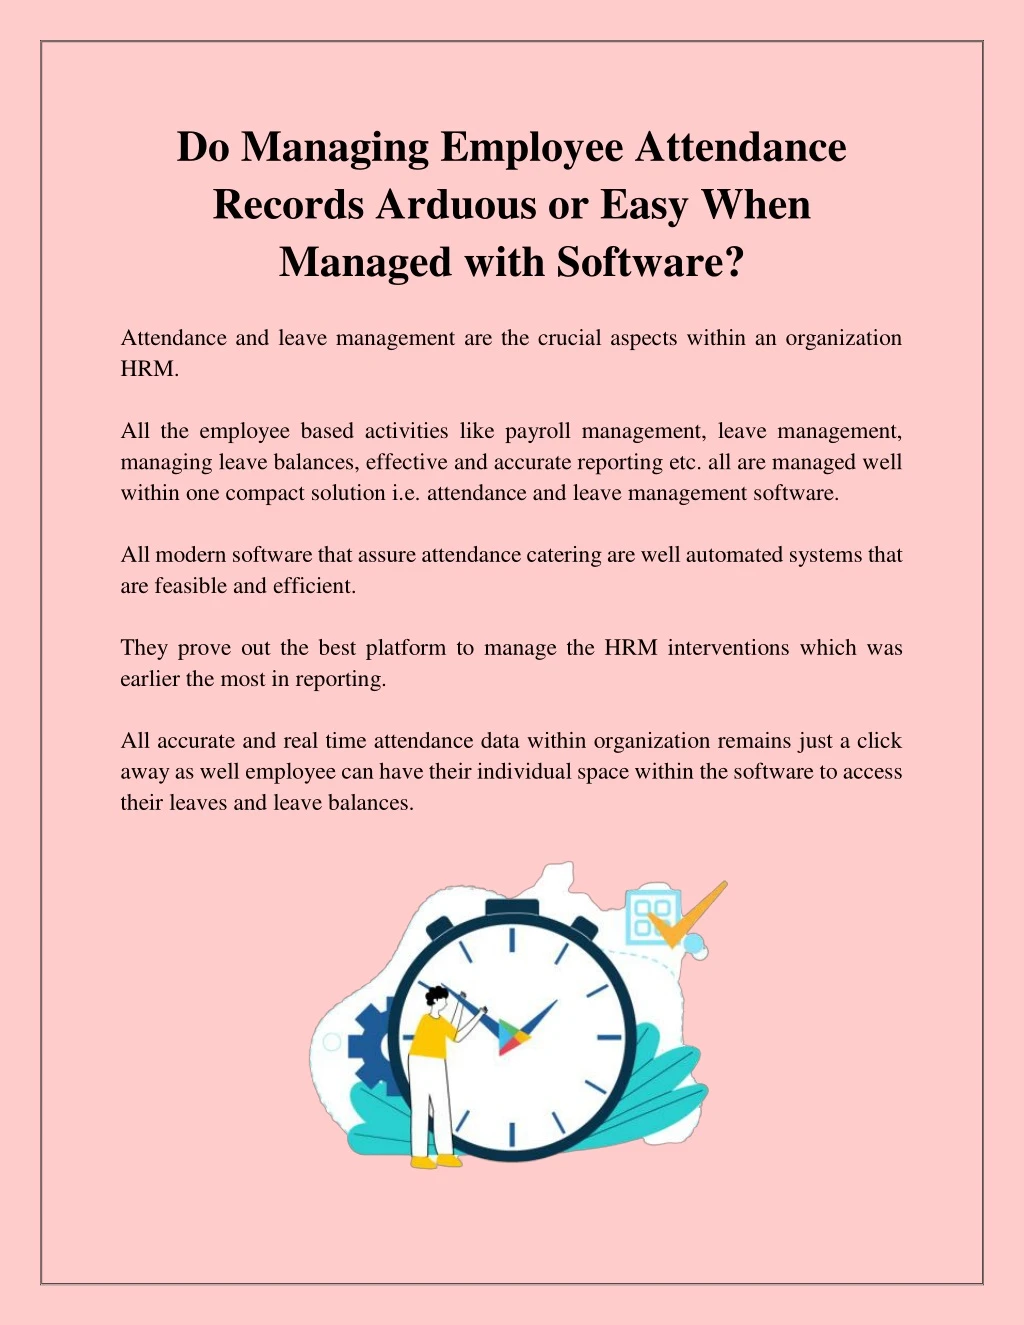 do managing employee attendance records arduous